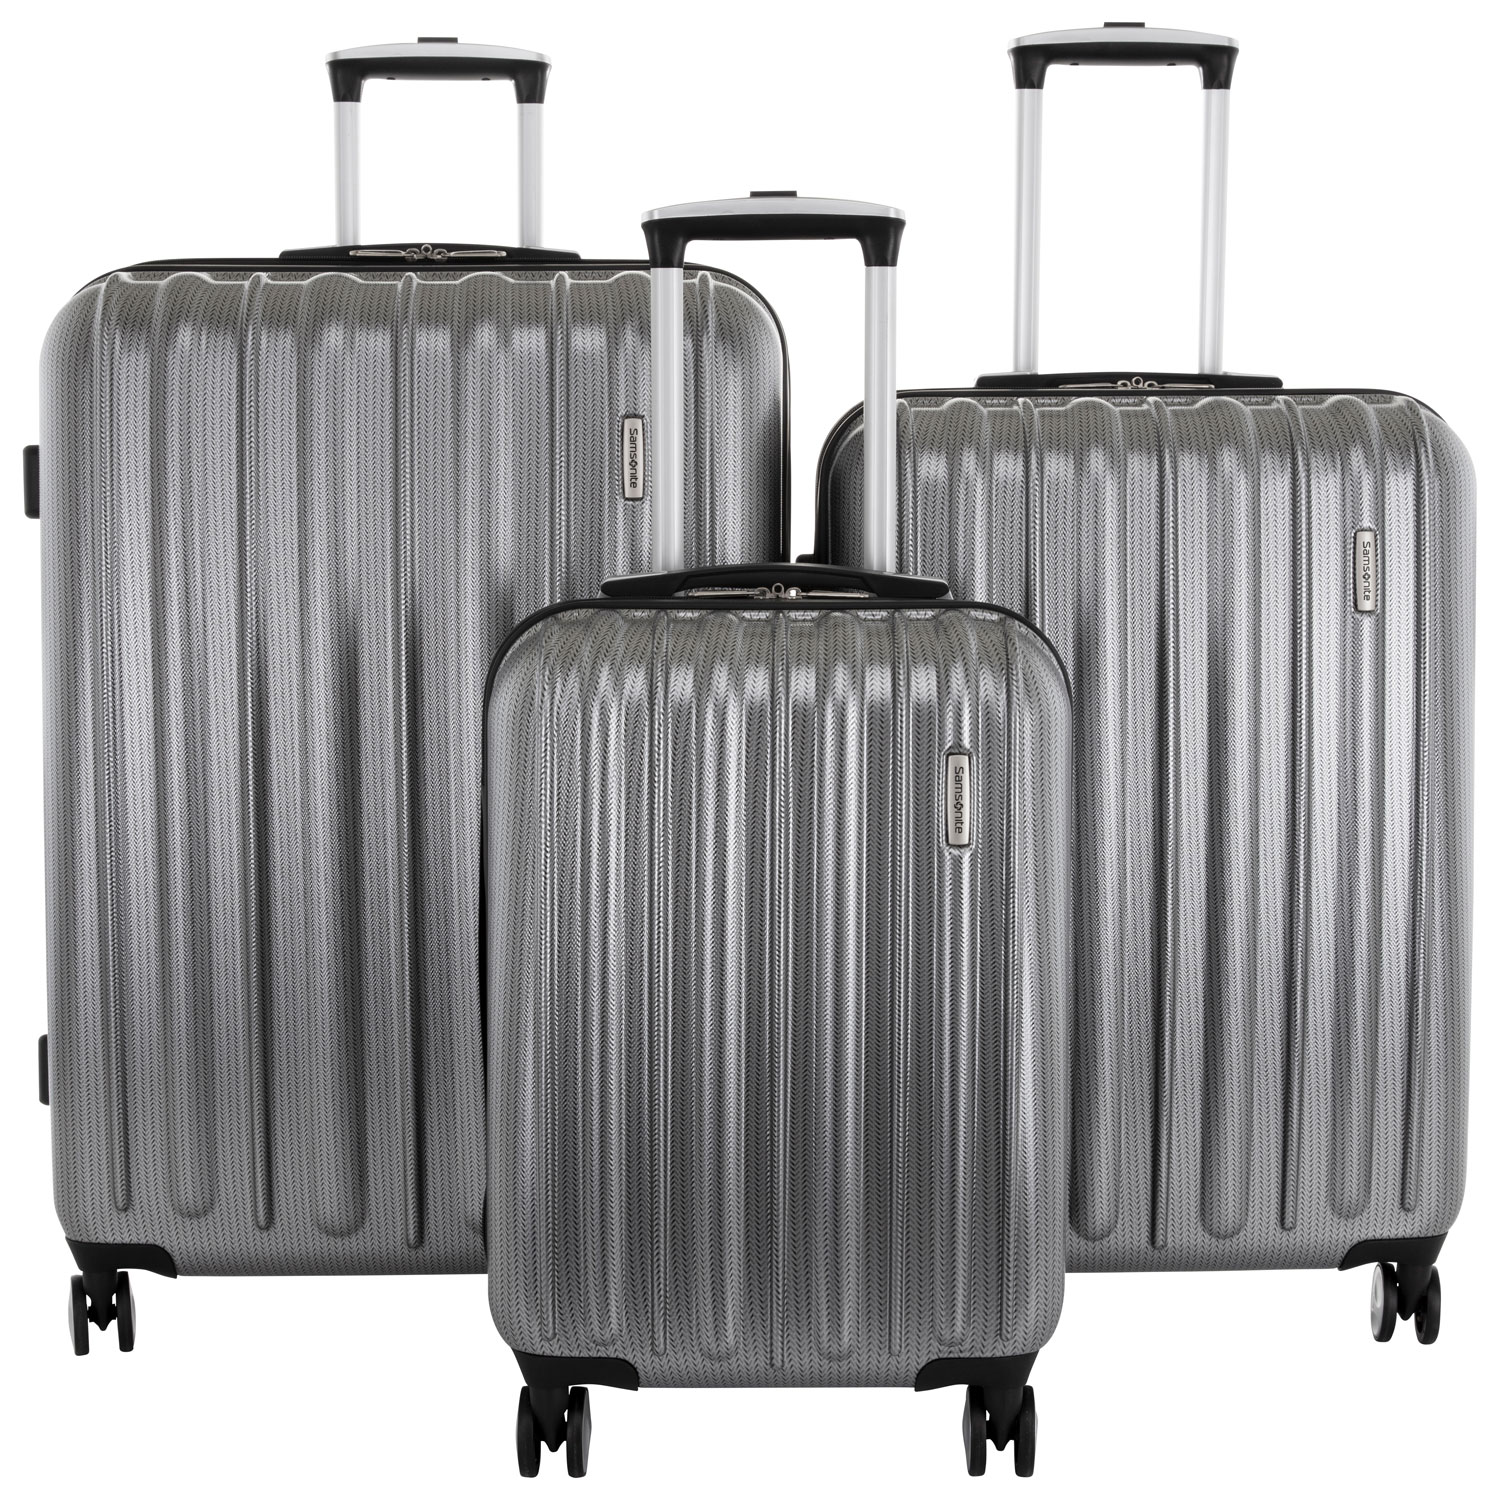 Samsonite Quarry 3-Piece Hard Side Expandable Luggage Set - Silver - Only at Best Buy